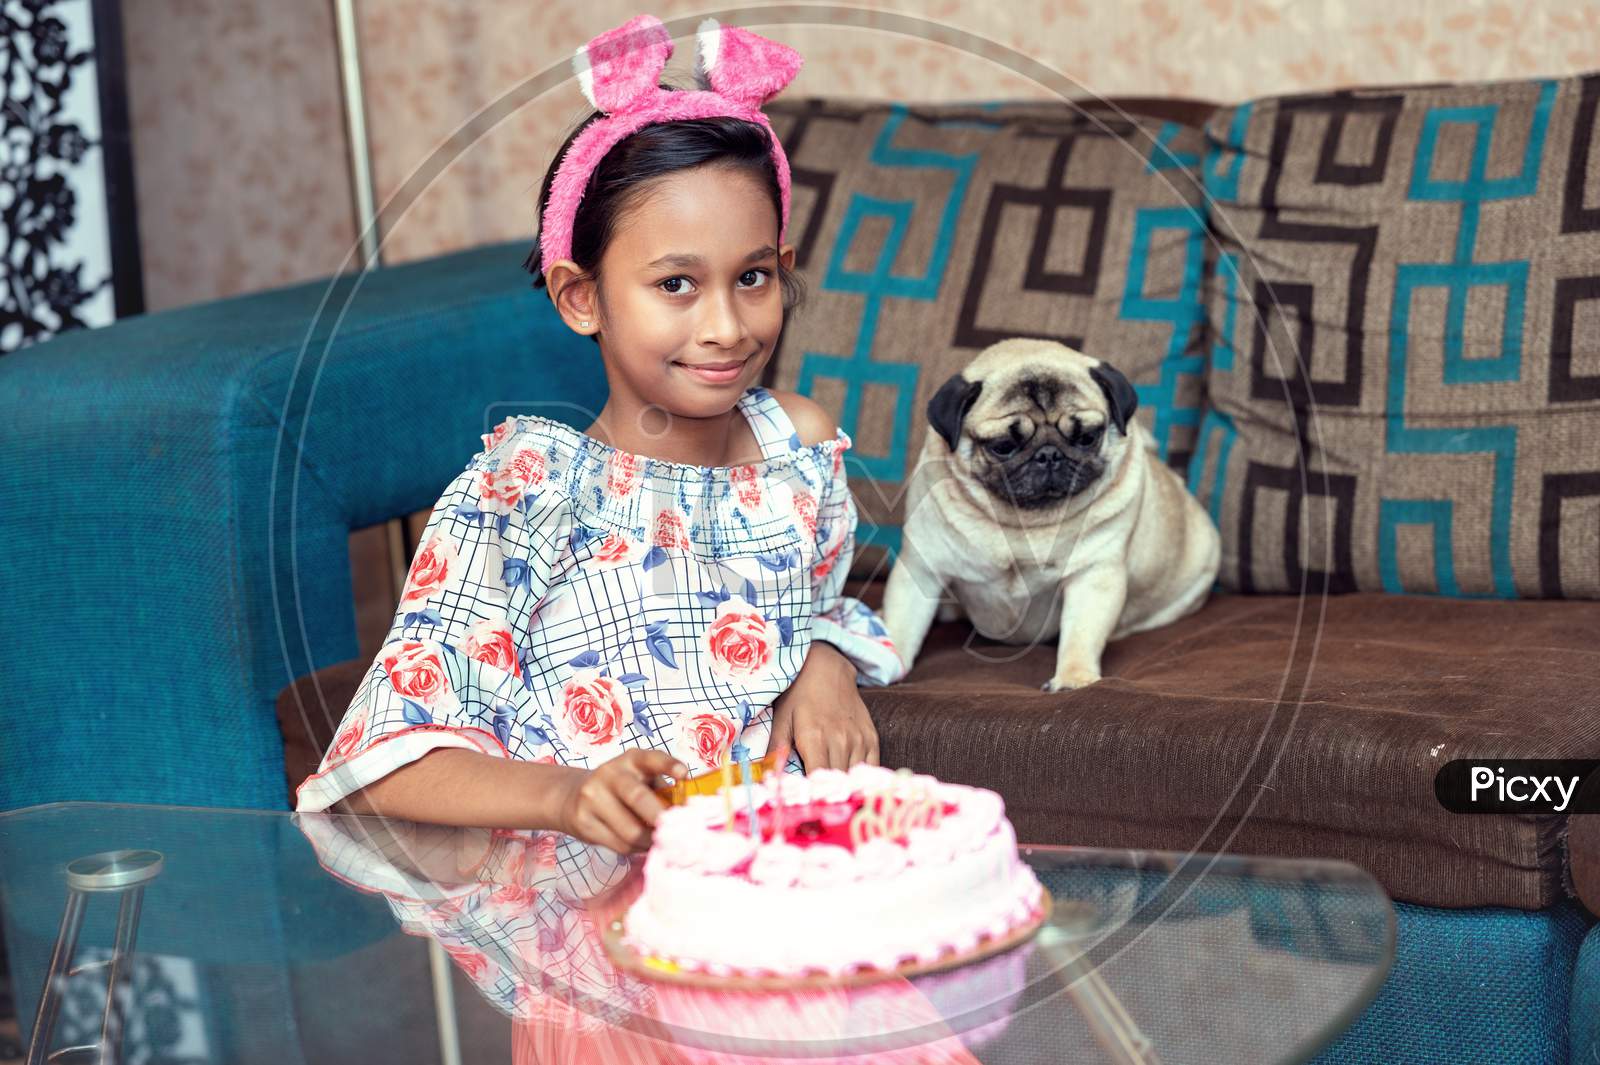 A happy beautiful girl taking photos of her birthday cake with her pet dog. Party, cake, friendship with pet animal concept.